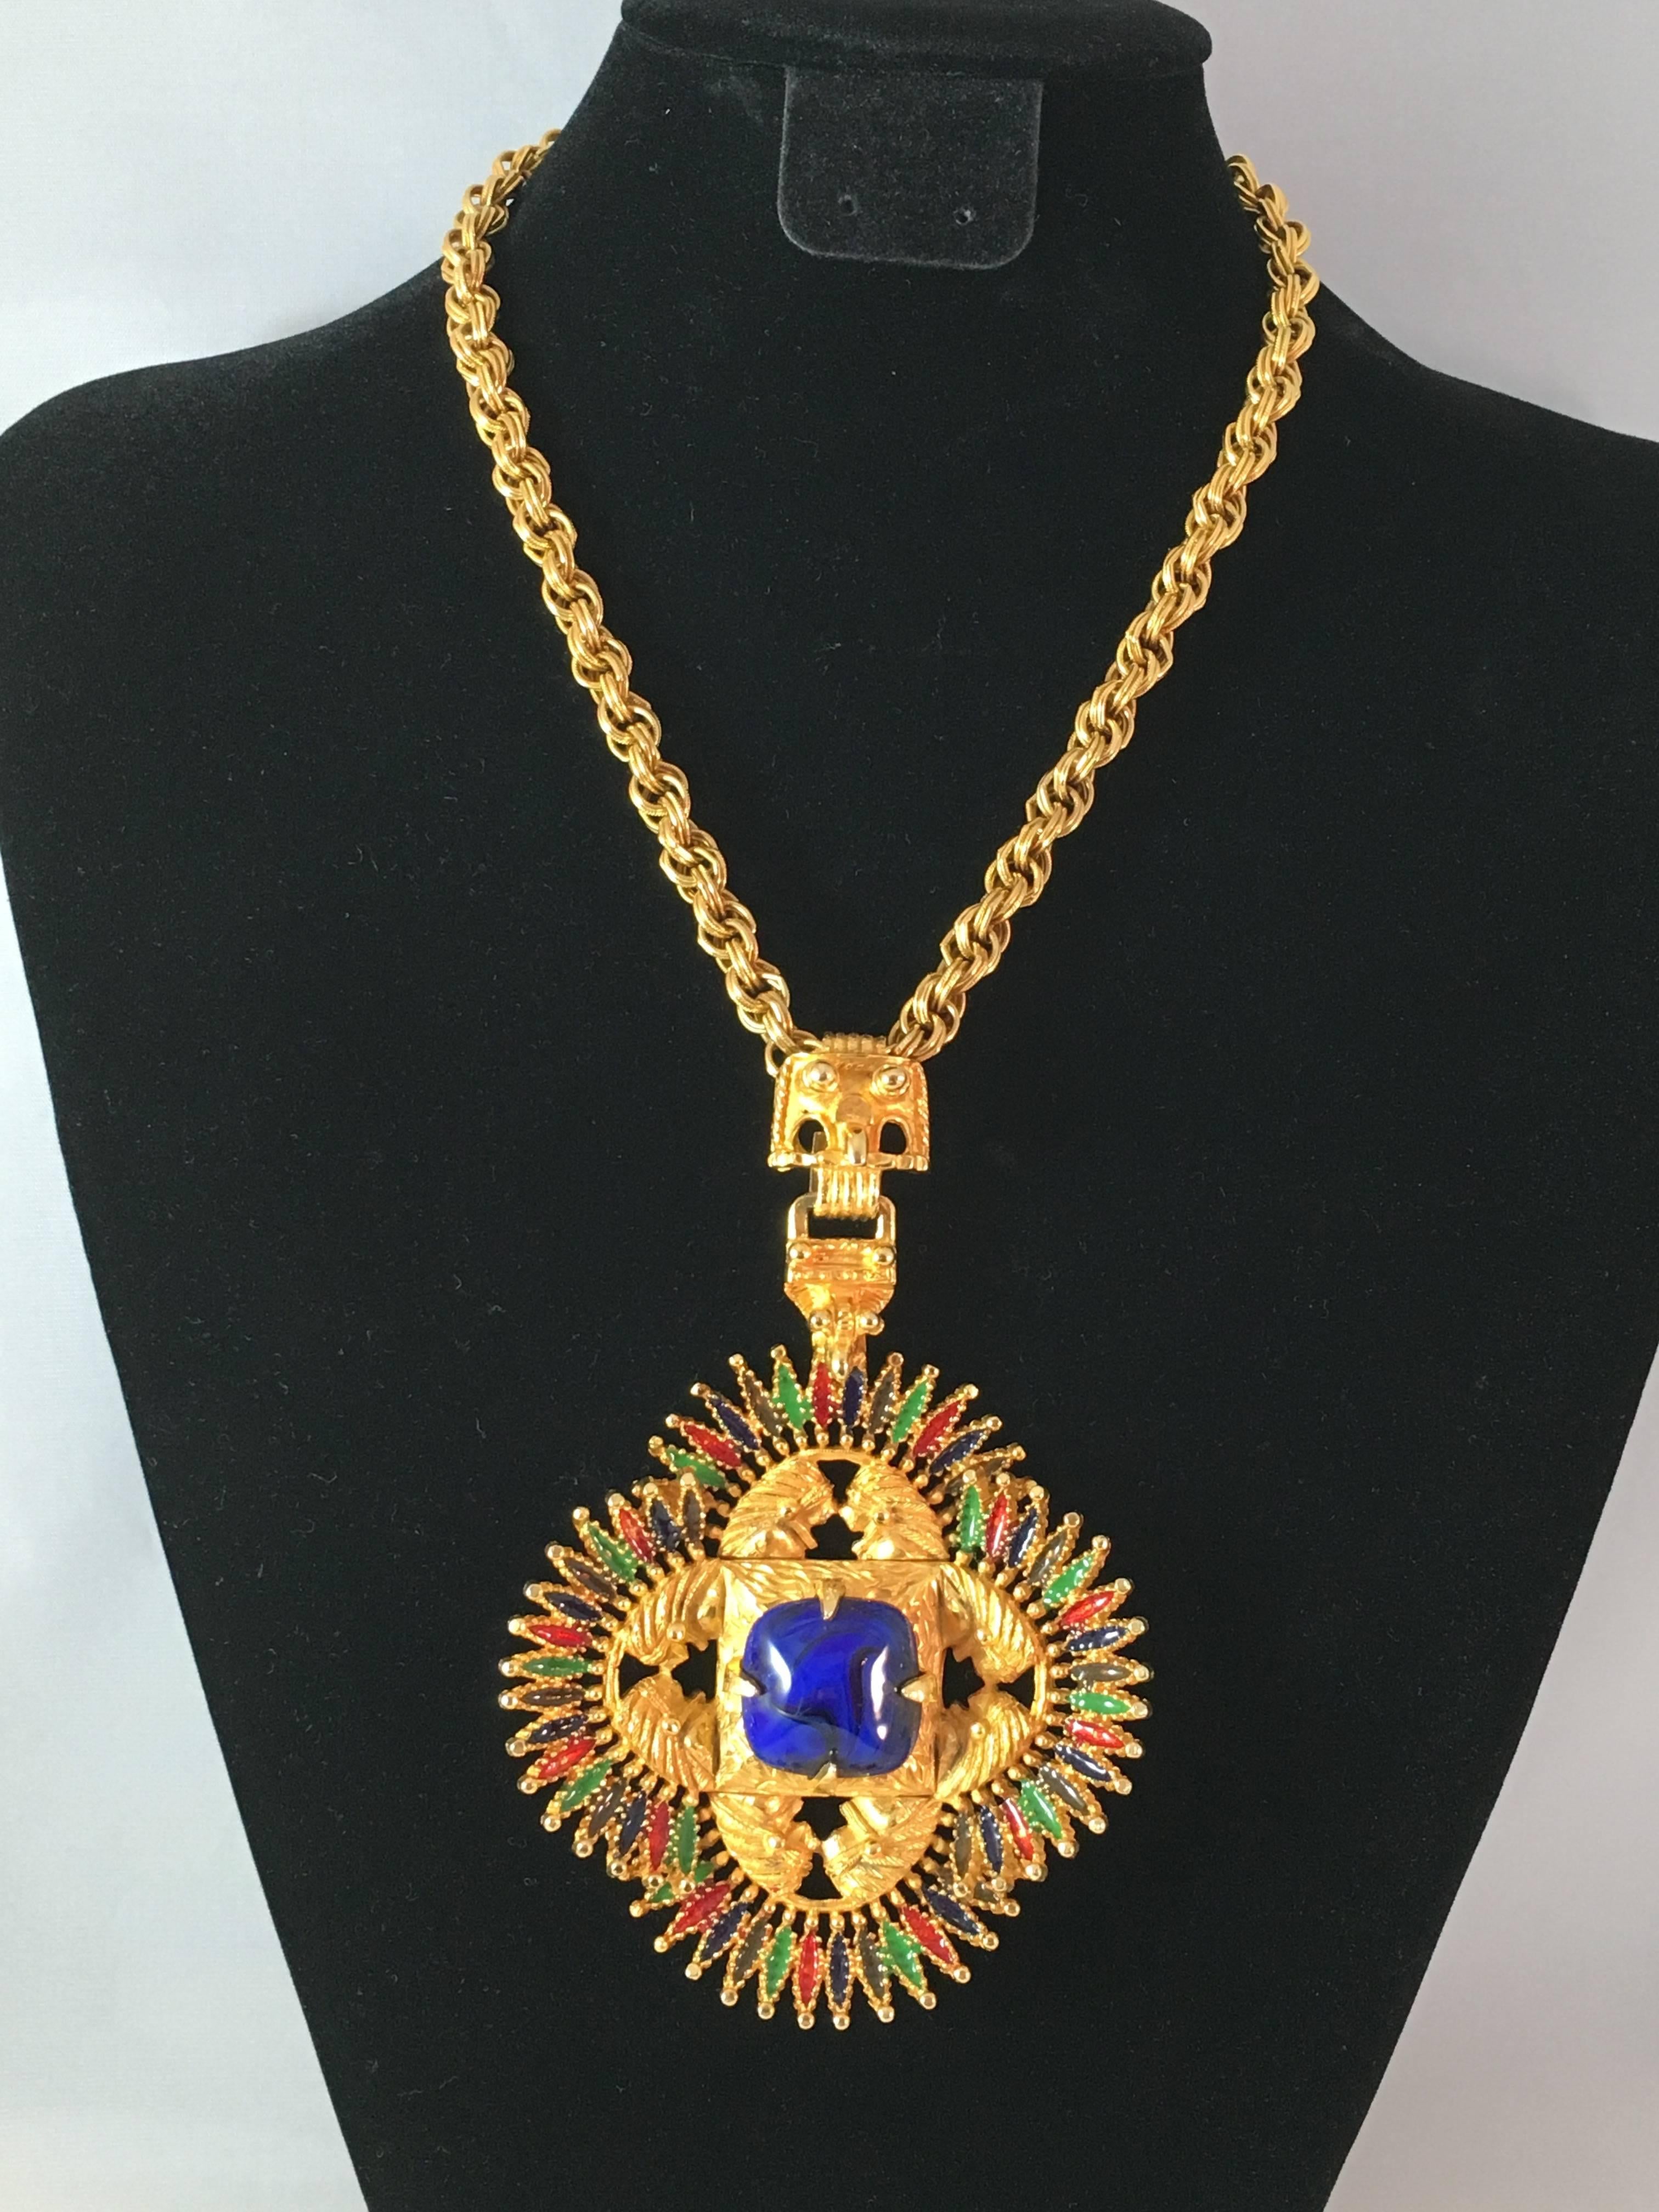 This goldtone pendant necklace was created for Castlecliff in 1973 by the jewelry designer, Larry VRBA. Its pendant is large measuring 3